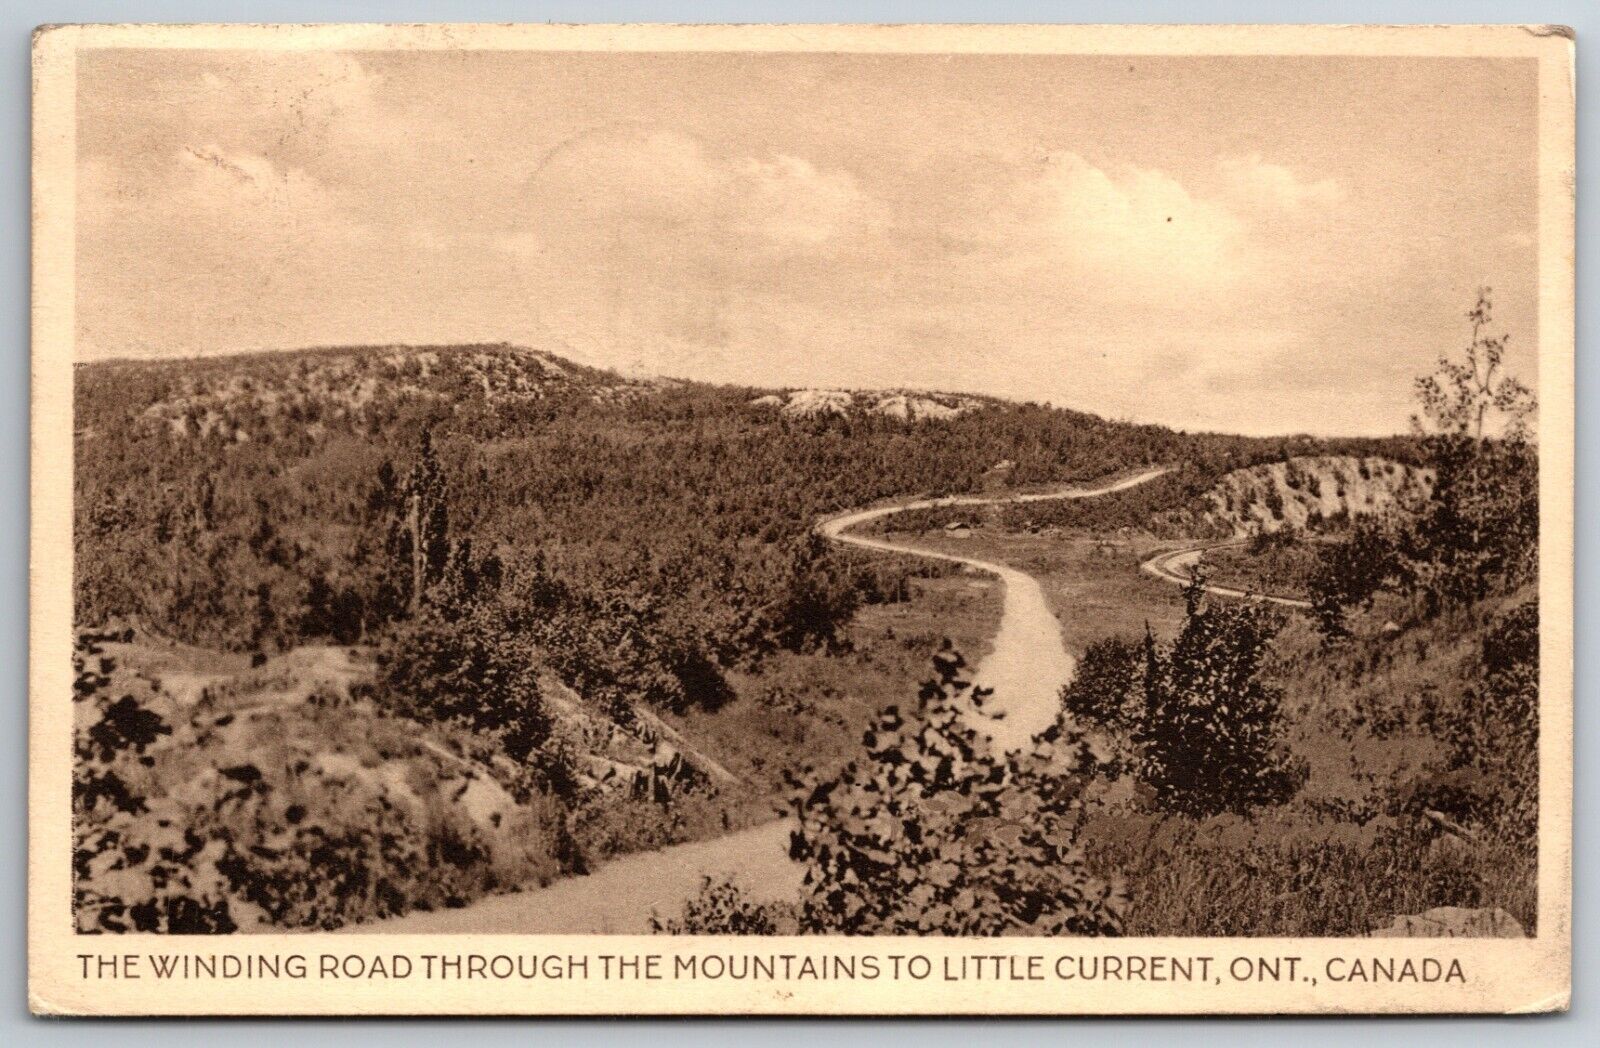 Winding Road Through the Mountains Little Current Ontario Canada 1940 Postcard